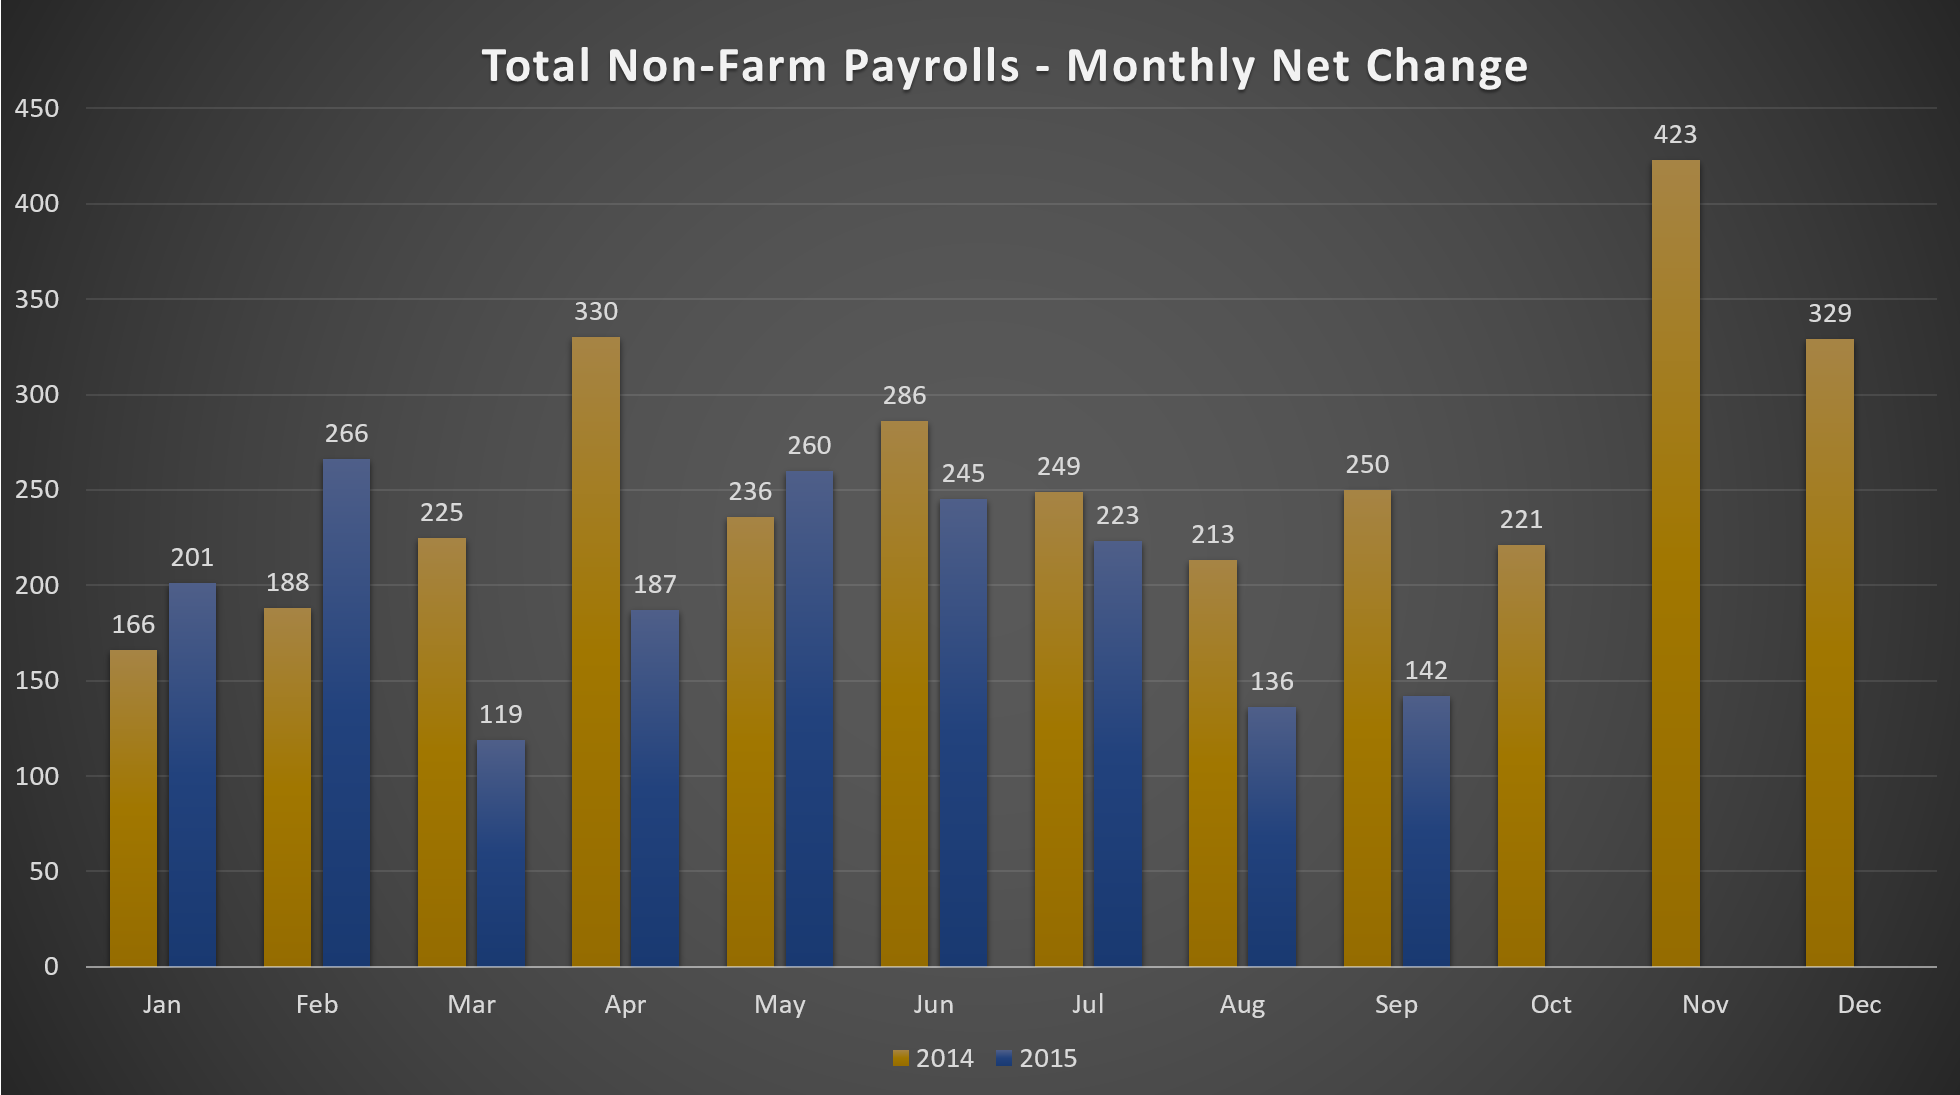 Total Non-Farm Payrolls – Monthly Net Change